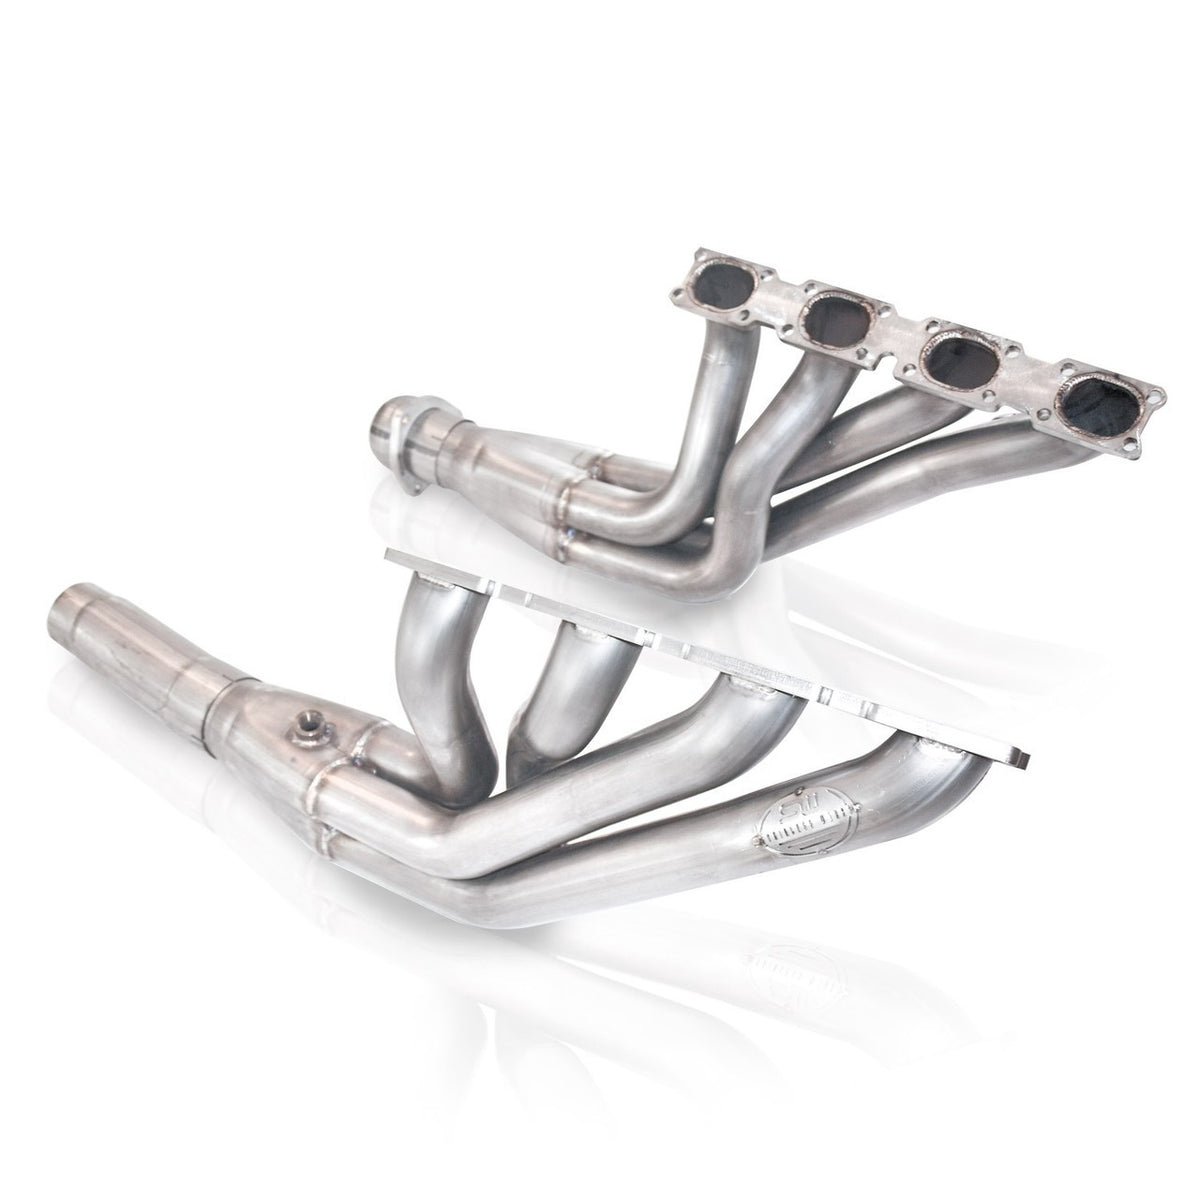 1990-1995 CORVETTE HEADERS: 2" OFF-ROAD FOR FACTORY OVAL PORTS, STAINLESS WORKS